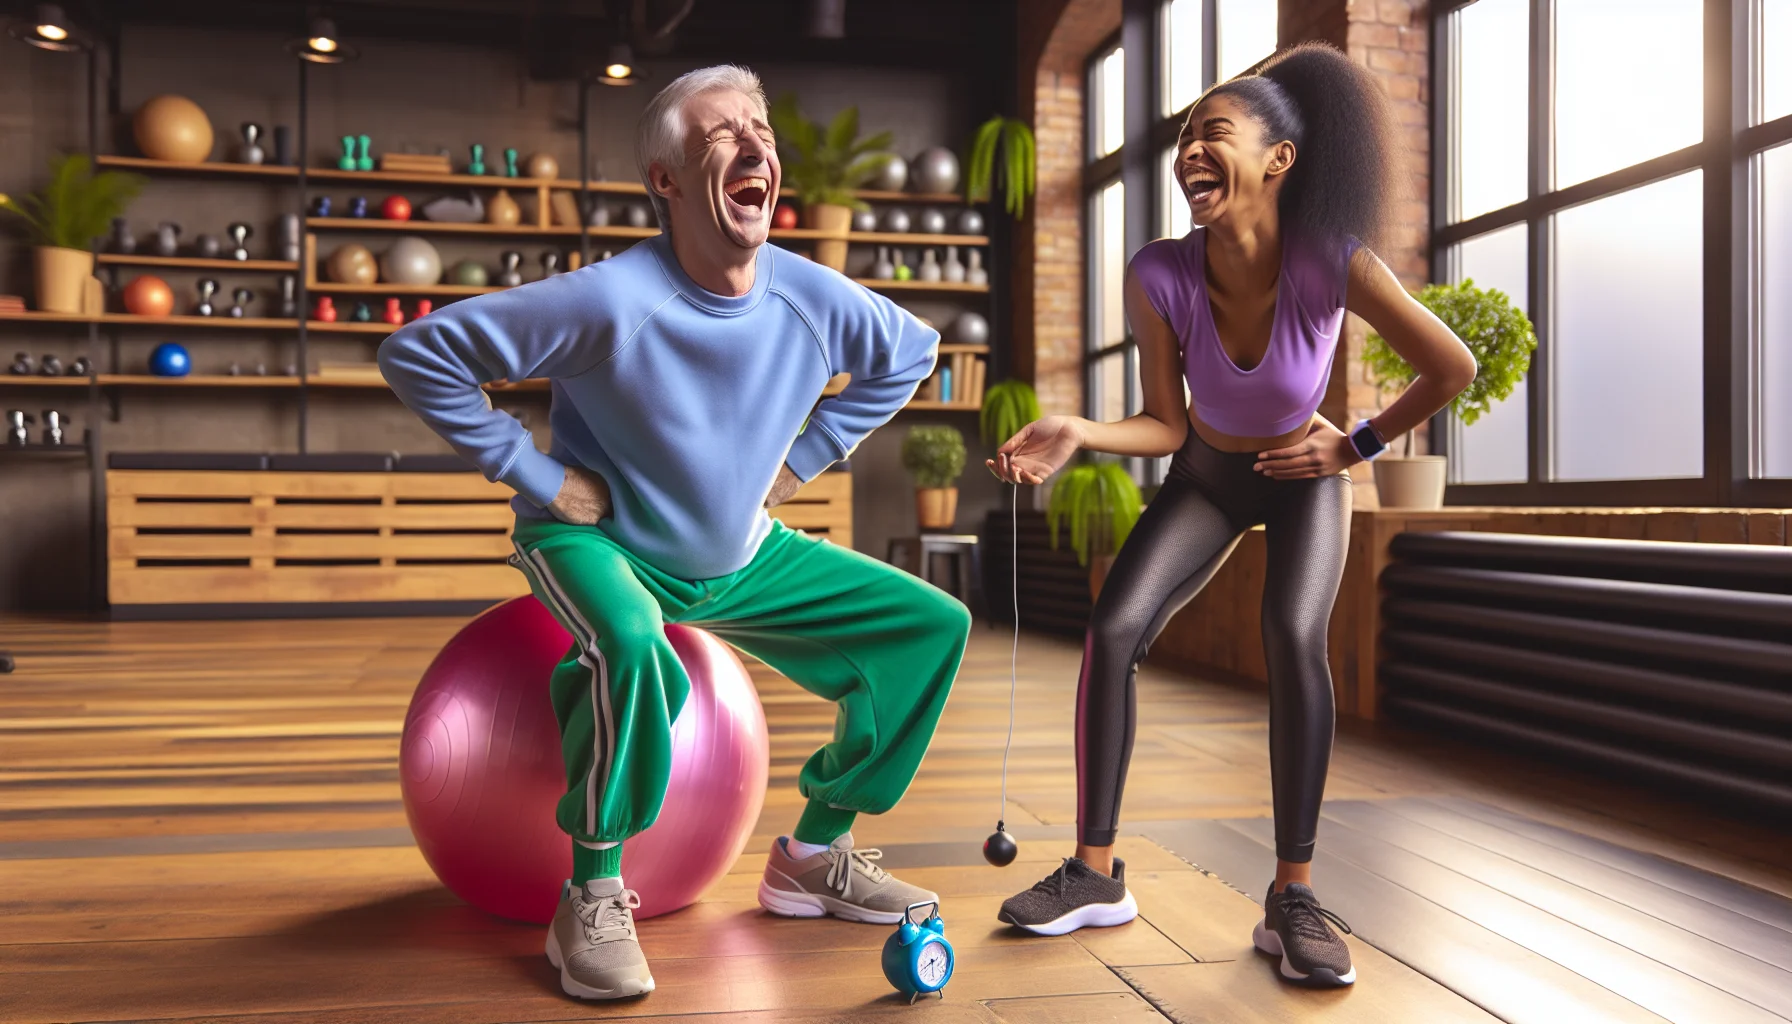 Create an entertaining scenario that illustrates generic fitness wear, inspired by expert reviews and analysis. Picture a middle-aged Caucasian man in vibrant green sweatpants and a cool blue sweatshirt, uncontrollably laughing as he tries to balance on a shiny pink exercise ball. Standing beside him, a young African-American woman in a purple tank top and black yoga pants holds a stopwatch and smiles encouragingly, trying hard not to laugh. In the background, a well-decorated gym environment adds to the humor and energy of the scene, making it difficult for anyone to resist a good workout.